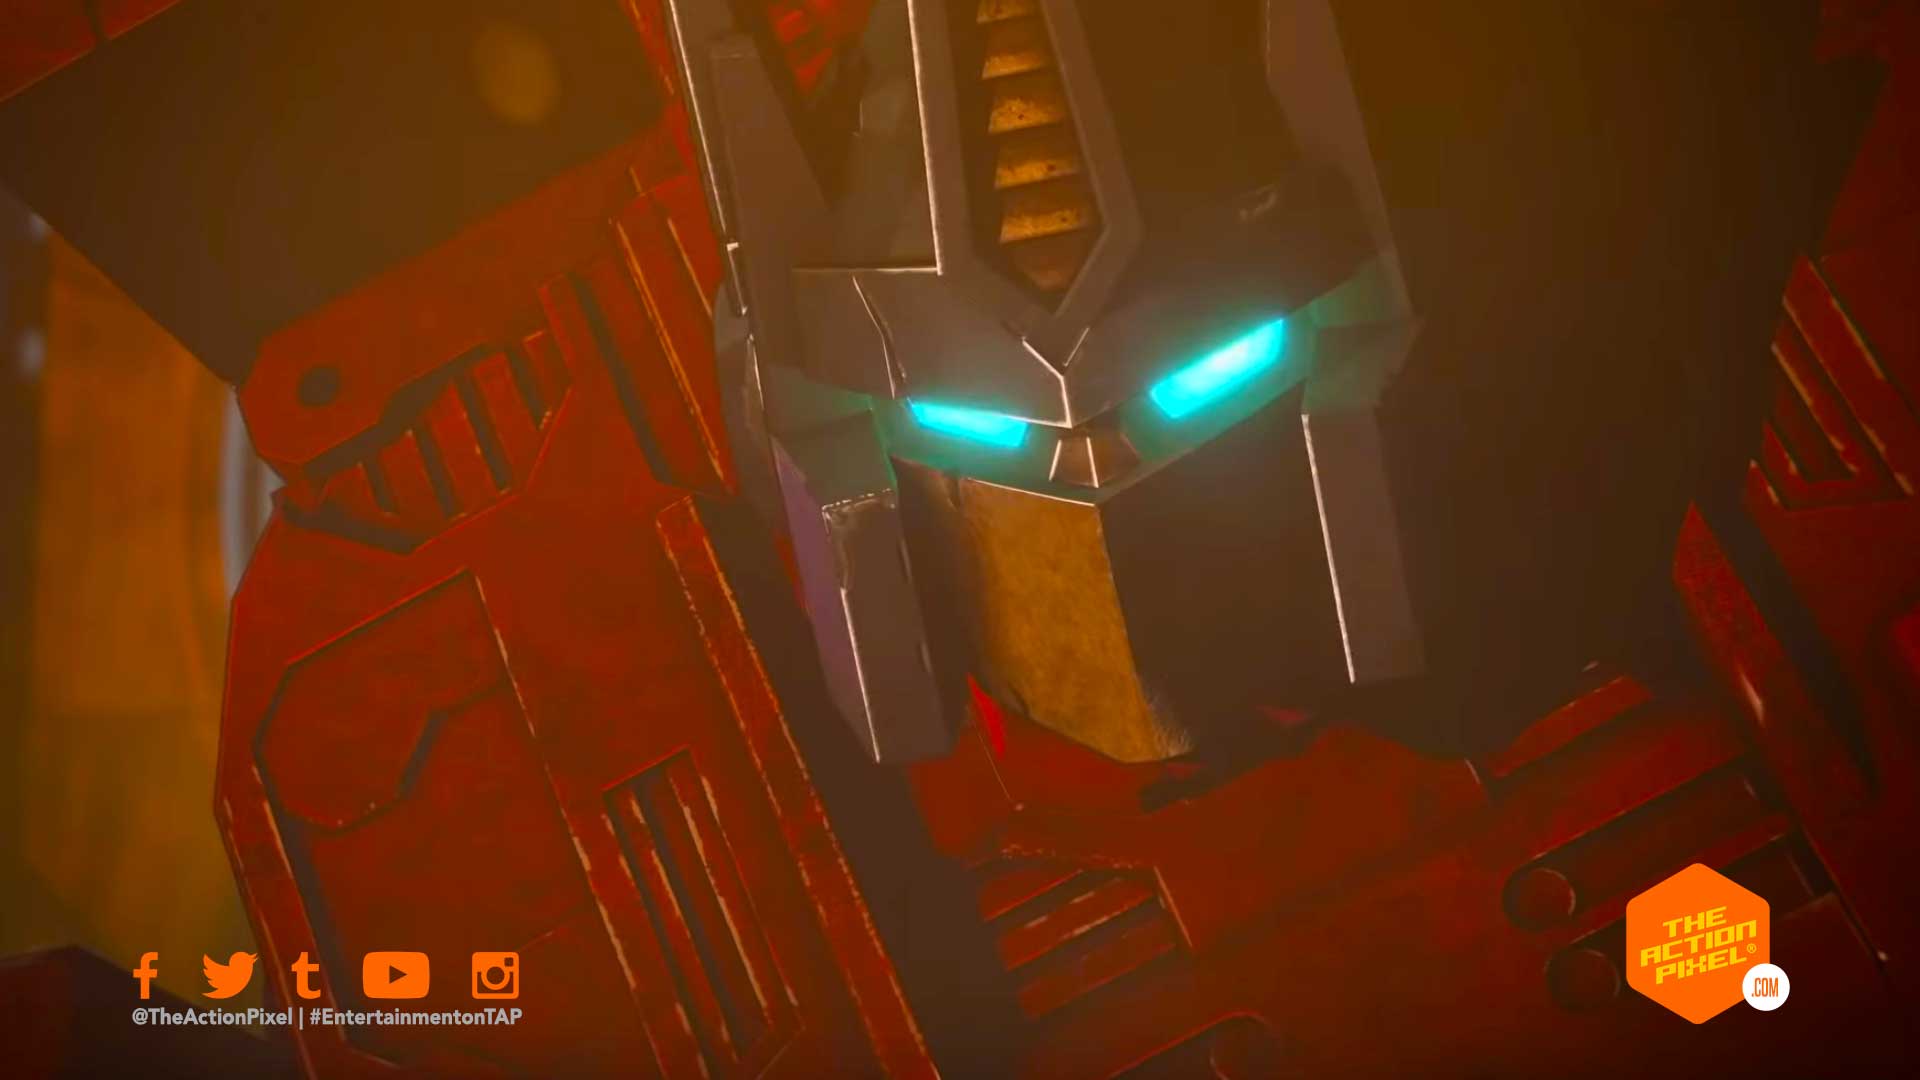 transformers: war for cybertron, rooster teeth, transformers, siege trailer, war for cybertron siege trailer, war for cybertron, transformers, netflix transformers anime, netflix transformers, entertainment on tap,featured,the action pixel